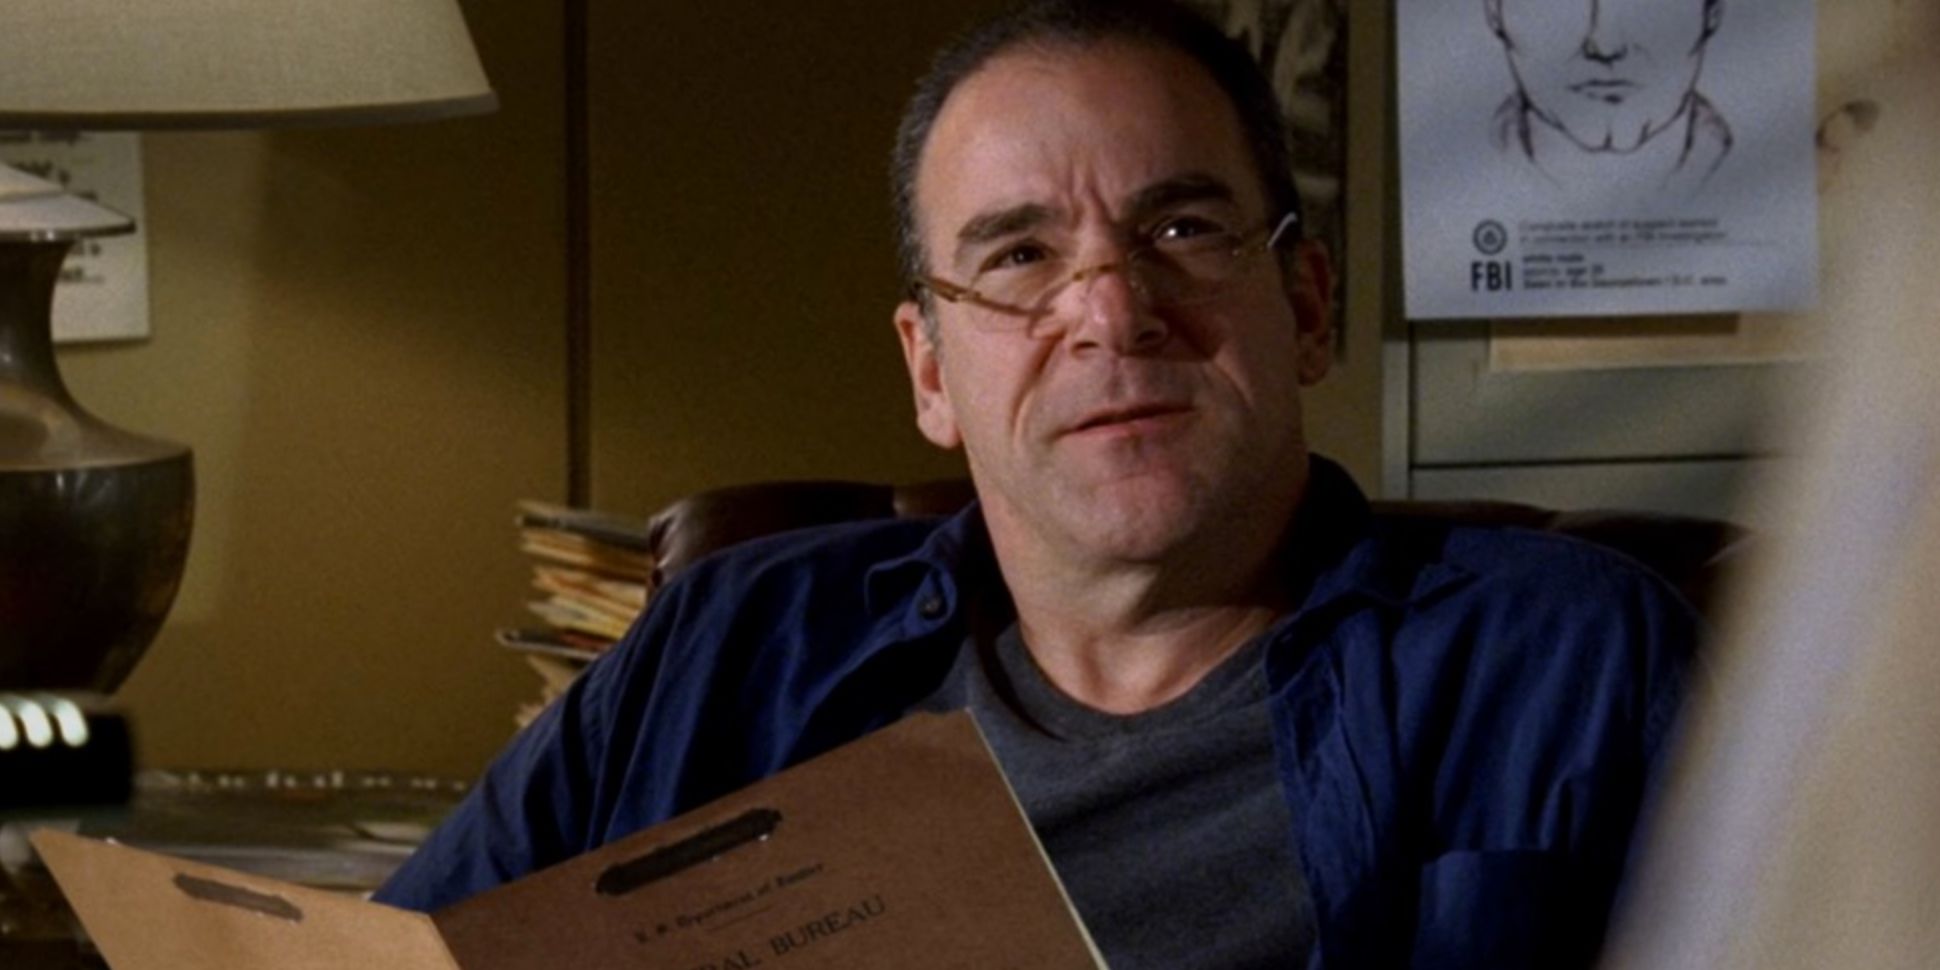 Jason Gideon sits in his office reading a file in Criminal Minds